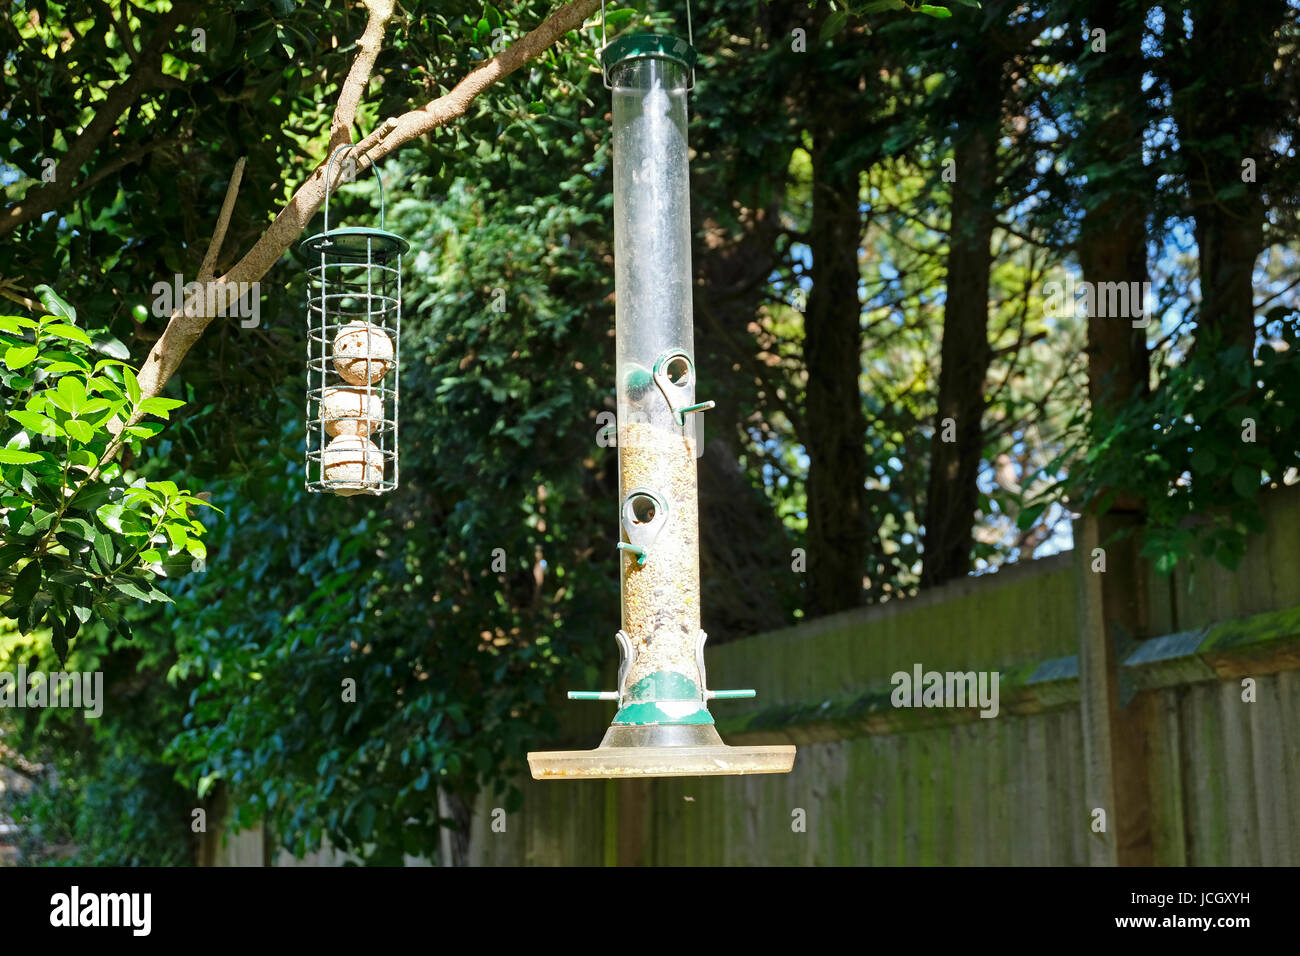 Fat ball feeder and bird seed feeder hanging from tree in British garden in Spring Stock Photo